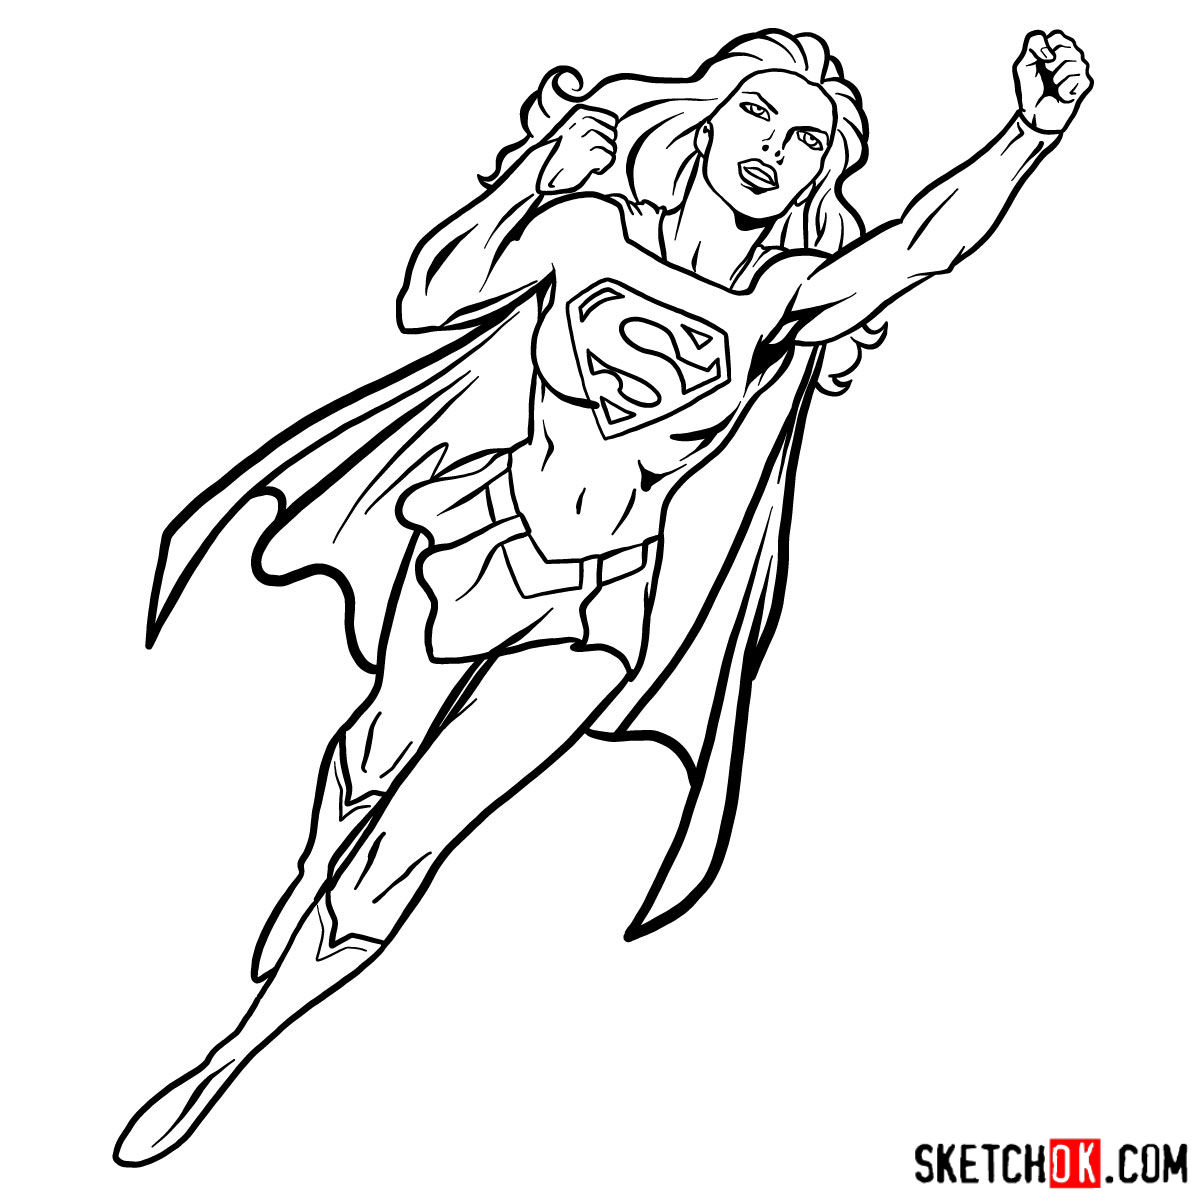 How to draw Supergirl in flight - step 14